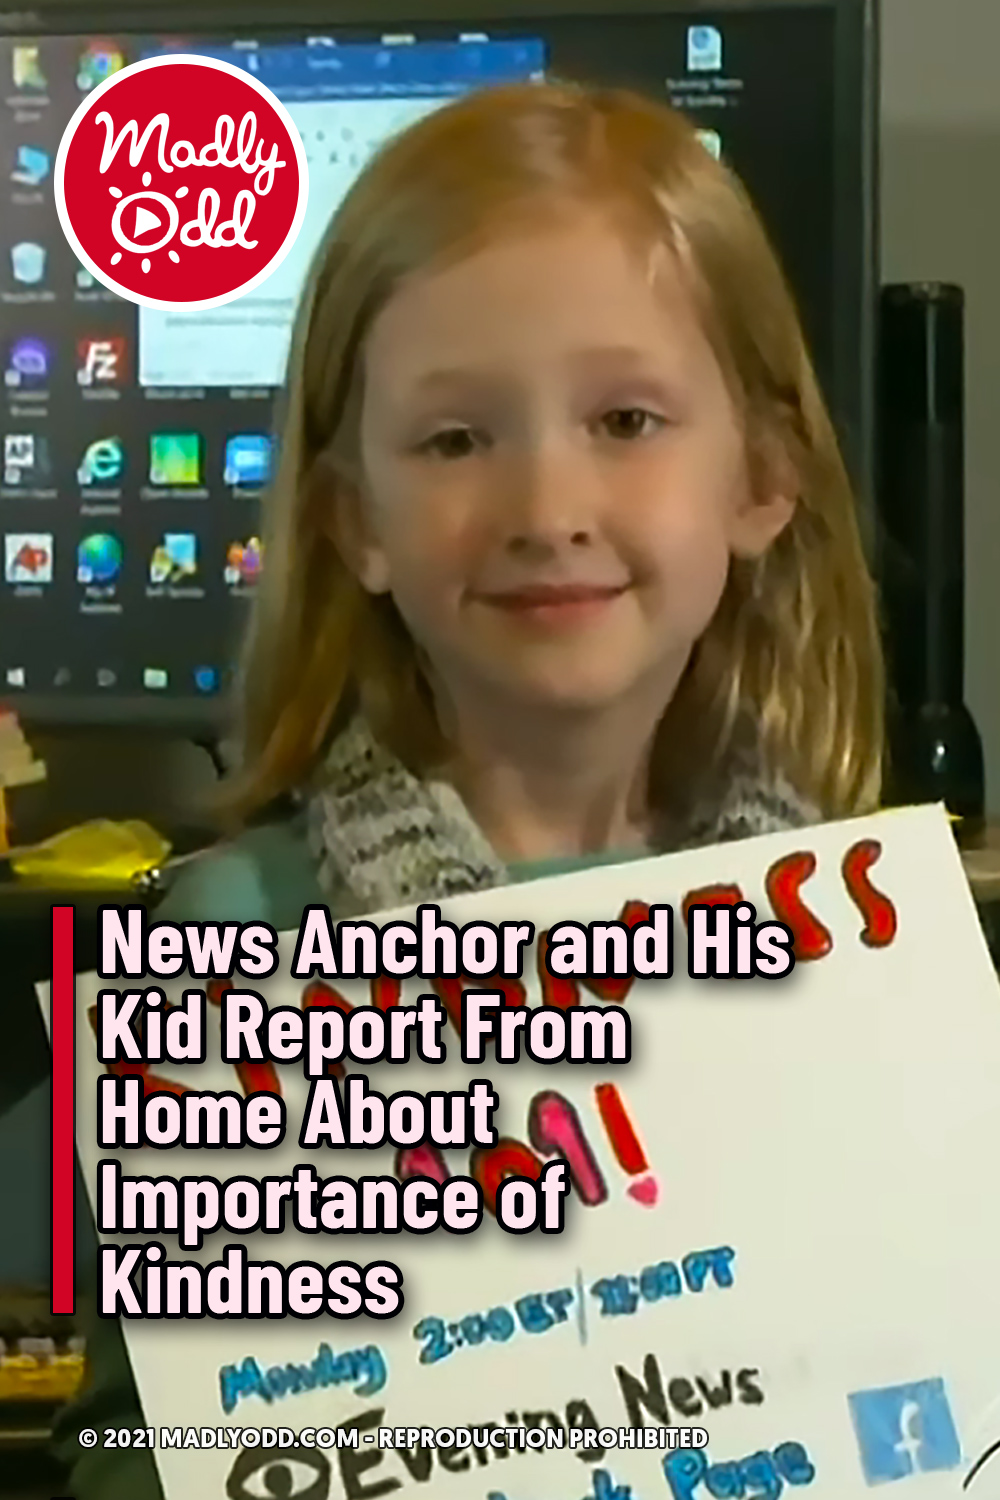 News Anchor and His Kid Report From Home About Importance of Kindness